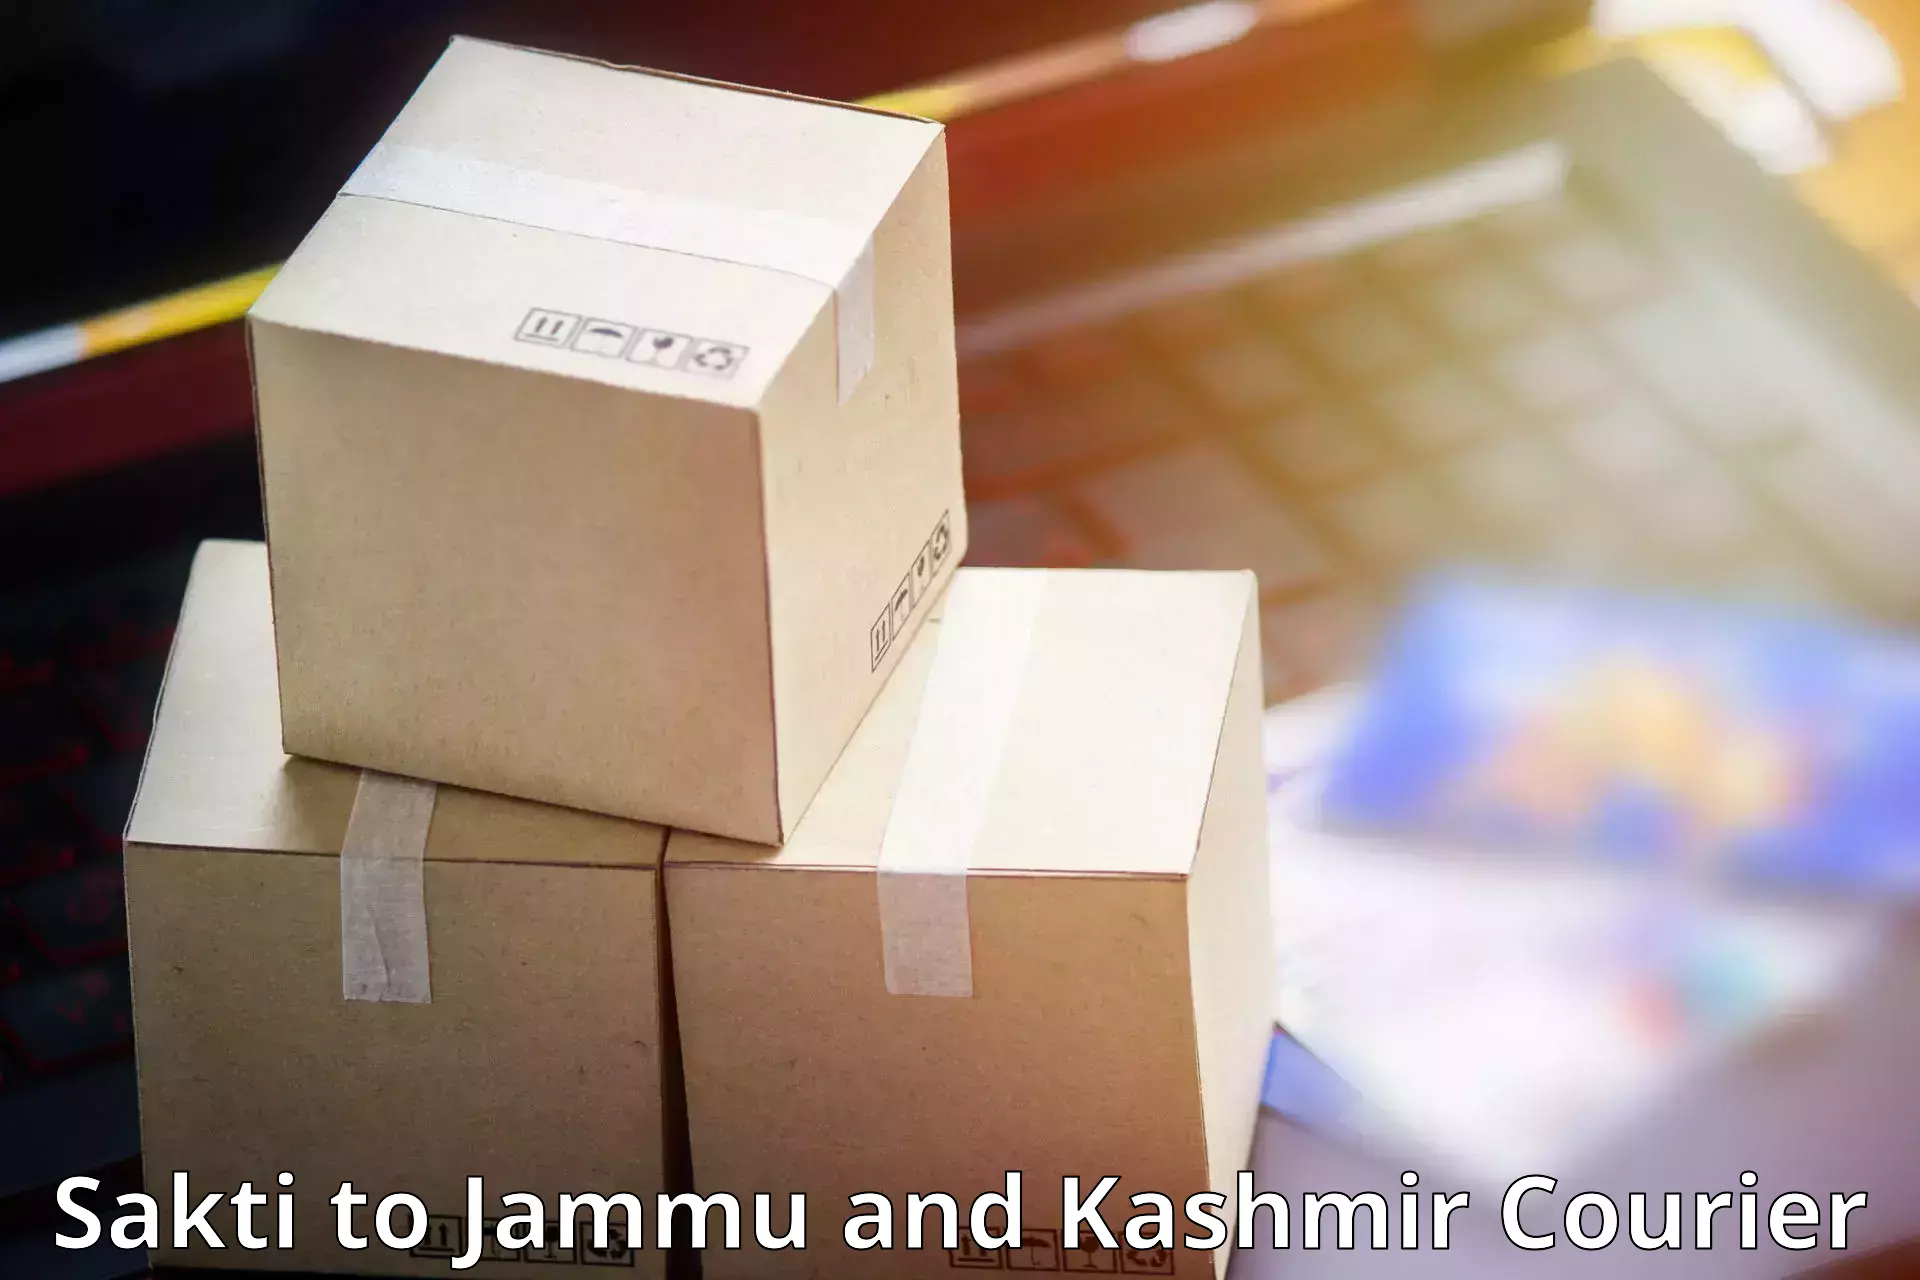 Courier services in Sakti to Jammu and Kashmir